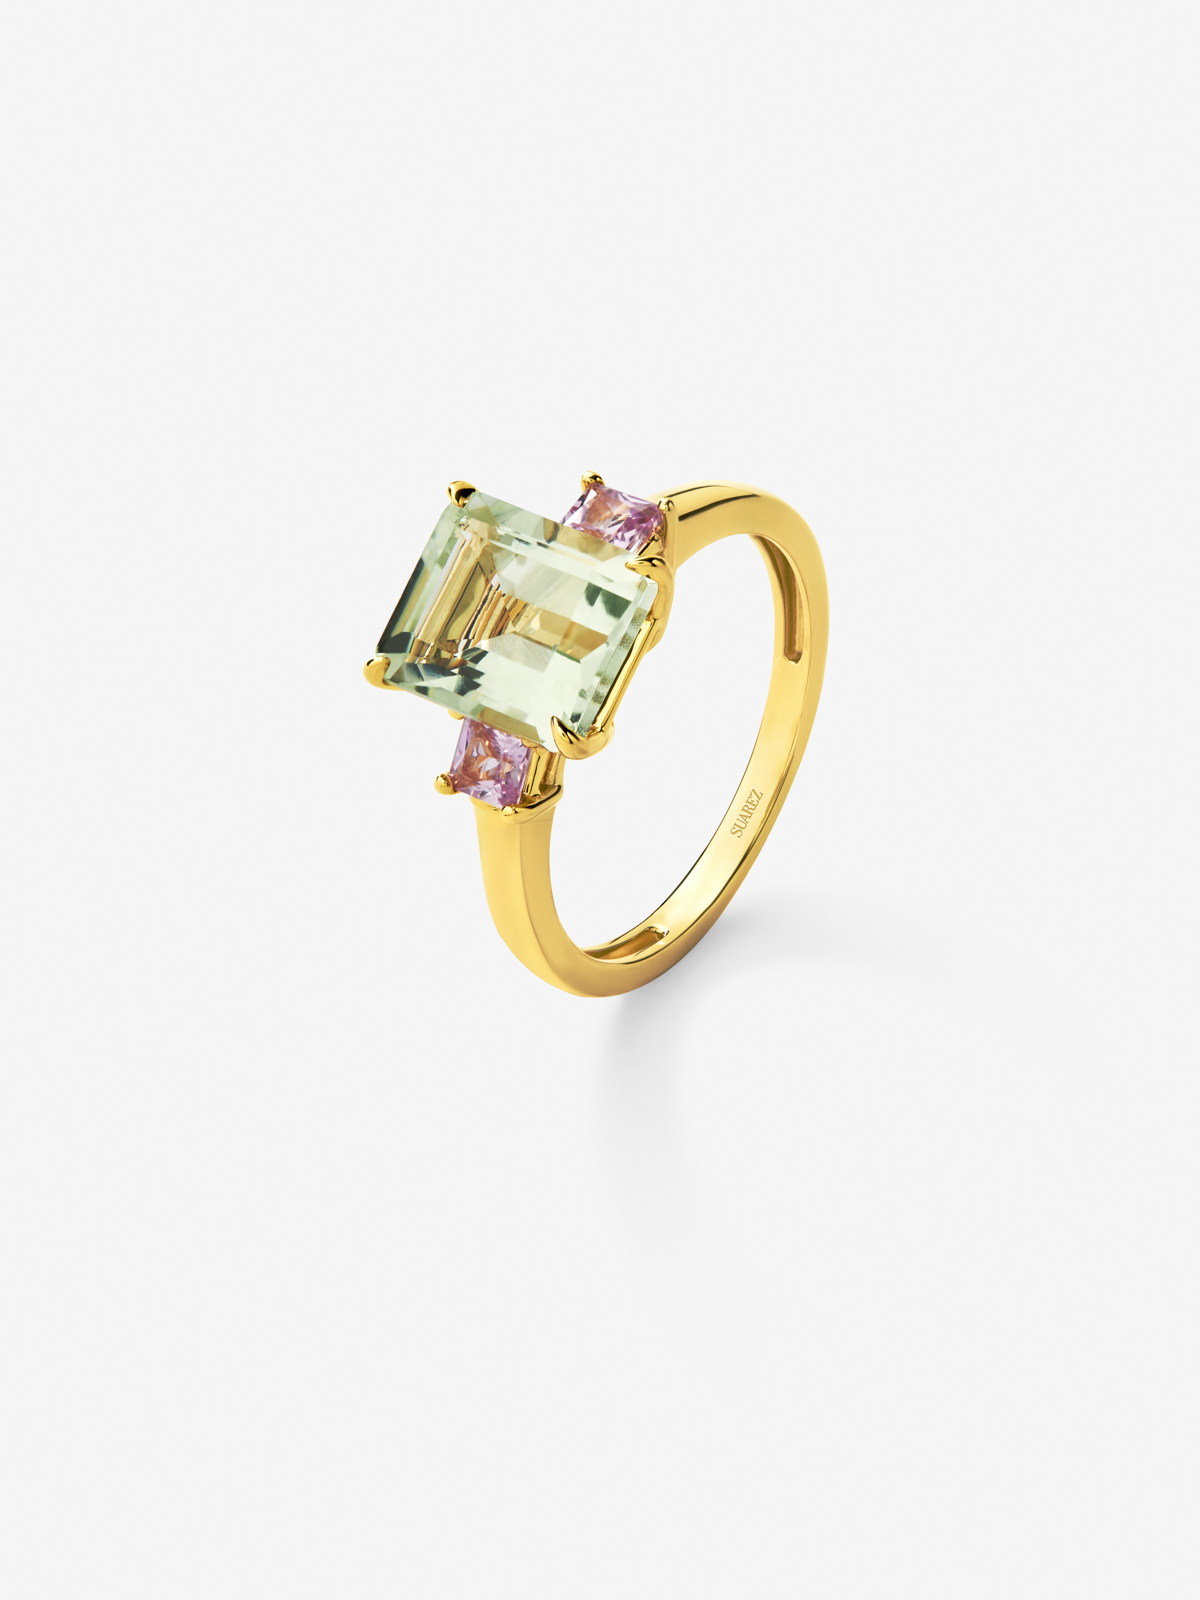 18k yellow golden ring with green amethyst in octagonal size 2.53 cts and pink sapphires in 0.41 cts princess size